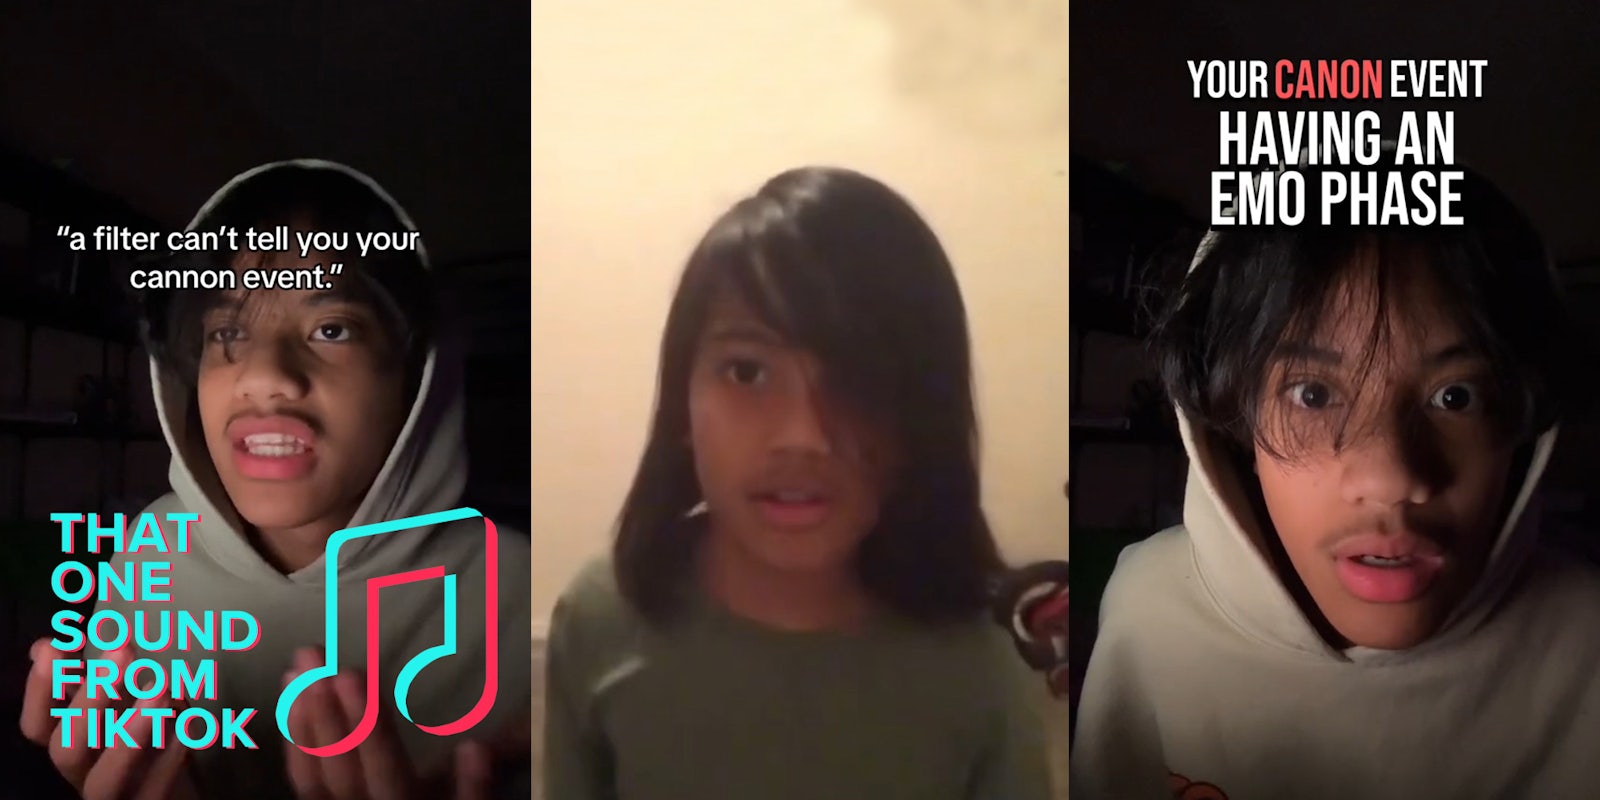 man with caption ''a filter can't tell you your cannon event'' with THAT ONE SOUND FROM TIKTOK logo in bottom left corner (l) kid with emo haircut in front of tan background (c) man with caption 'YOUR CANNON EVENT HAVING AN EMO PHASE' (r)